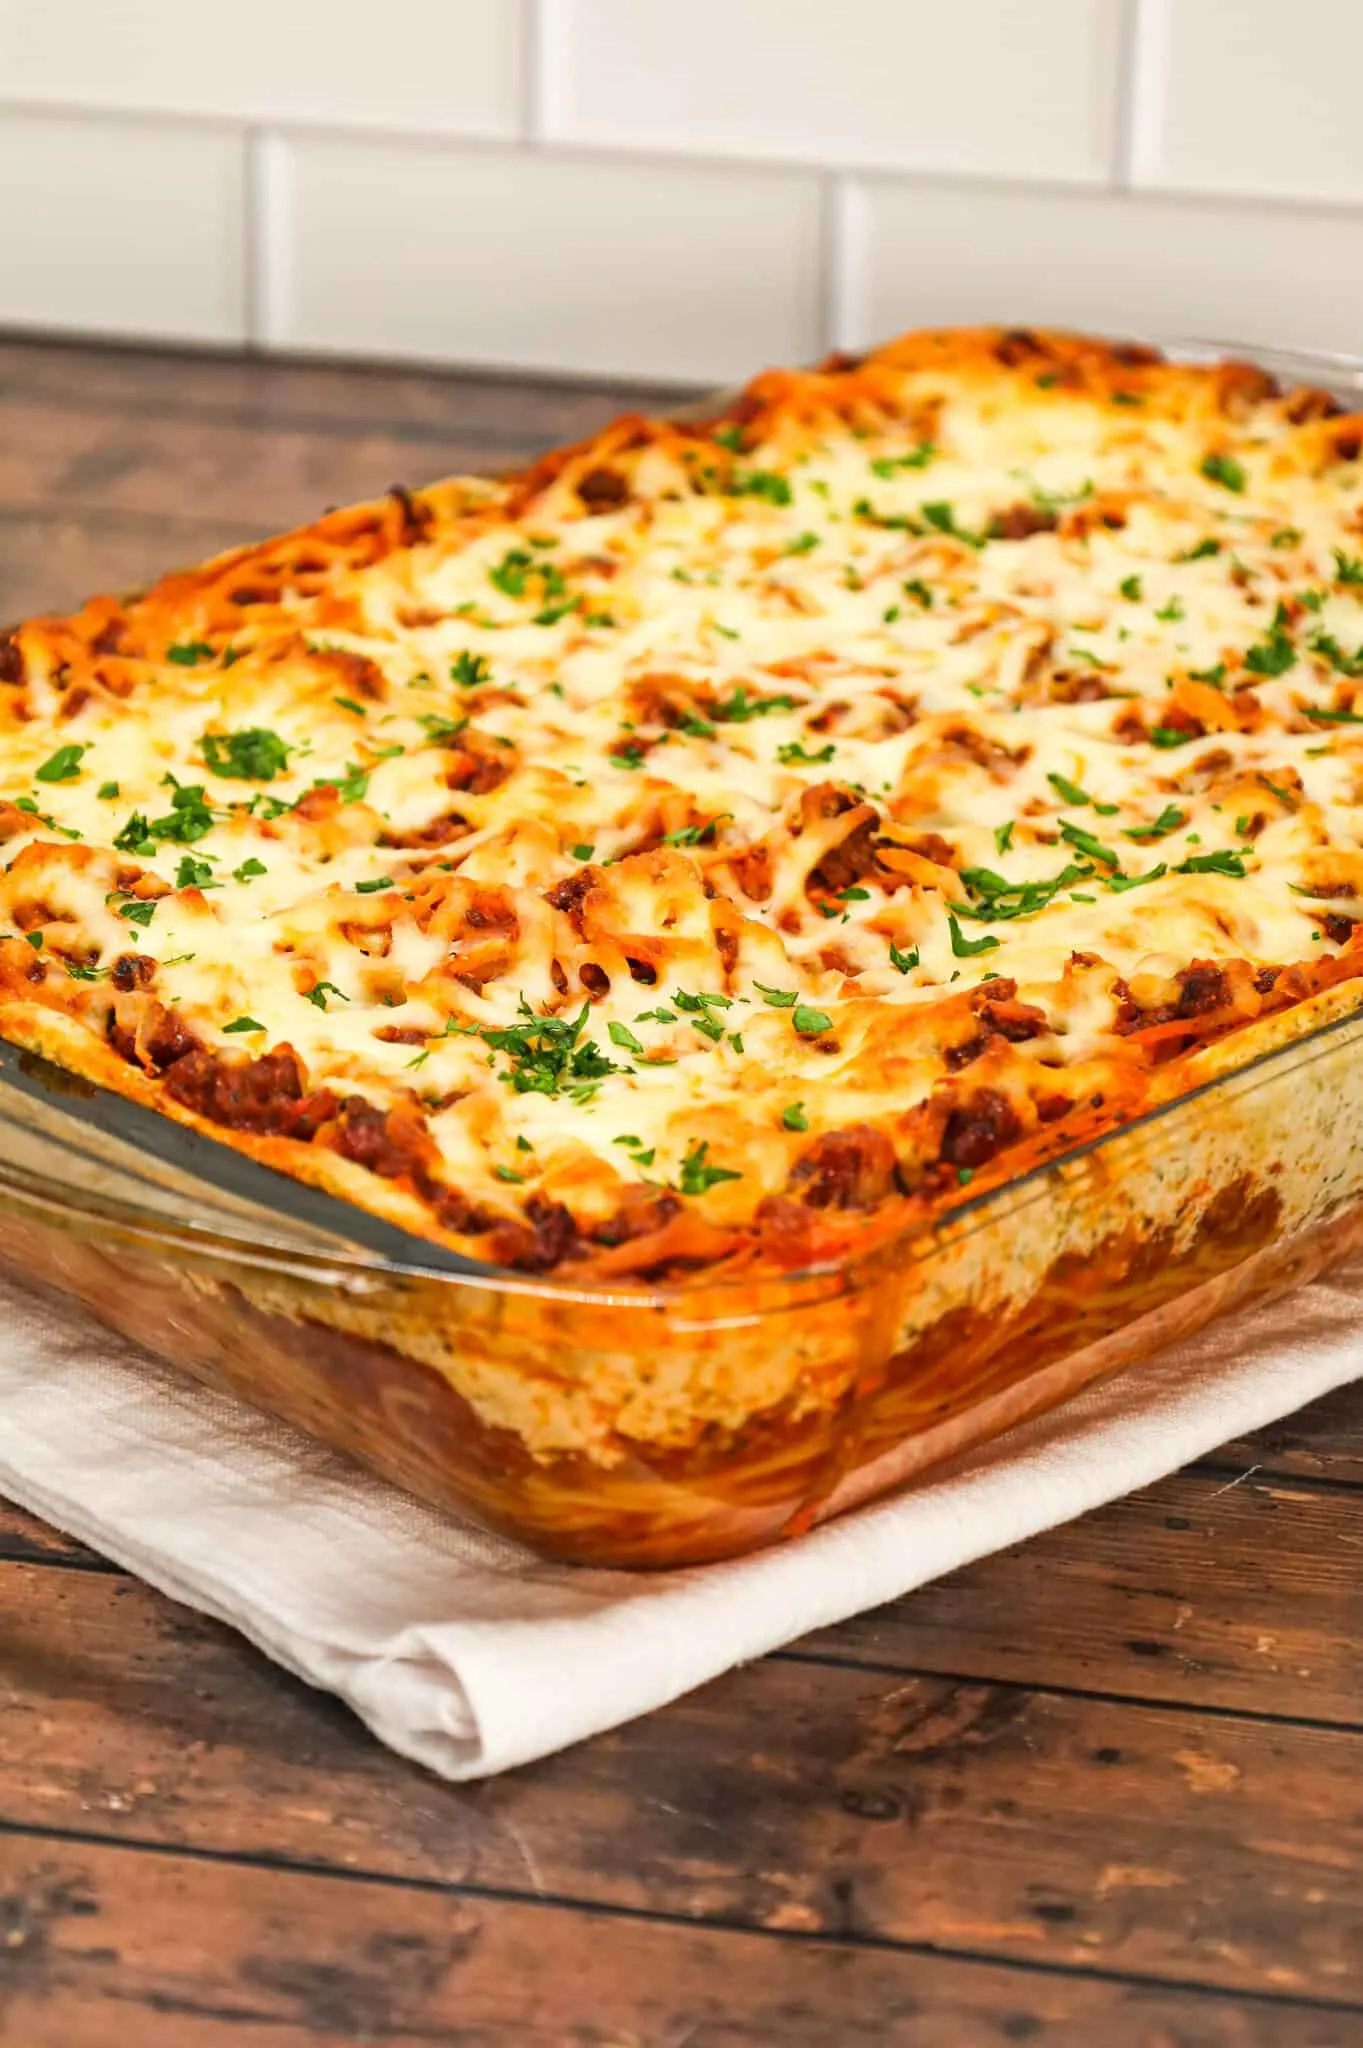 Spaghetti Casserole is a hearty dinner recipe loaded with ground beef, marinara, ricotta, sour cream, mozzarella and parmesan cheese.